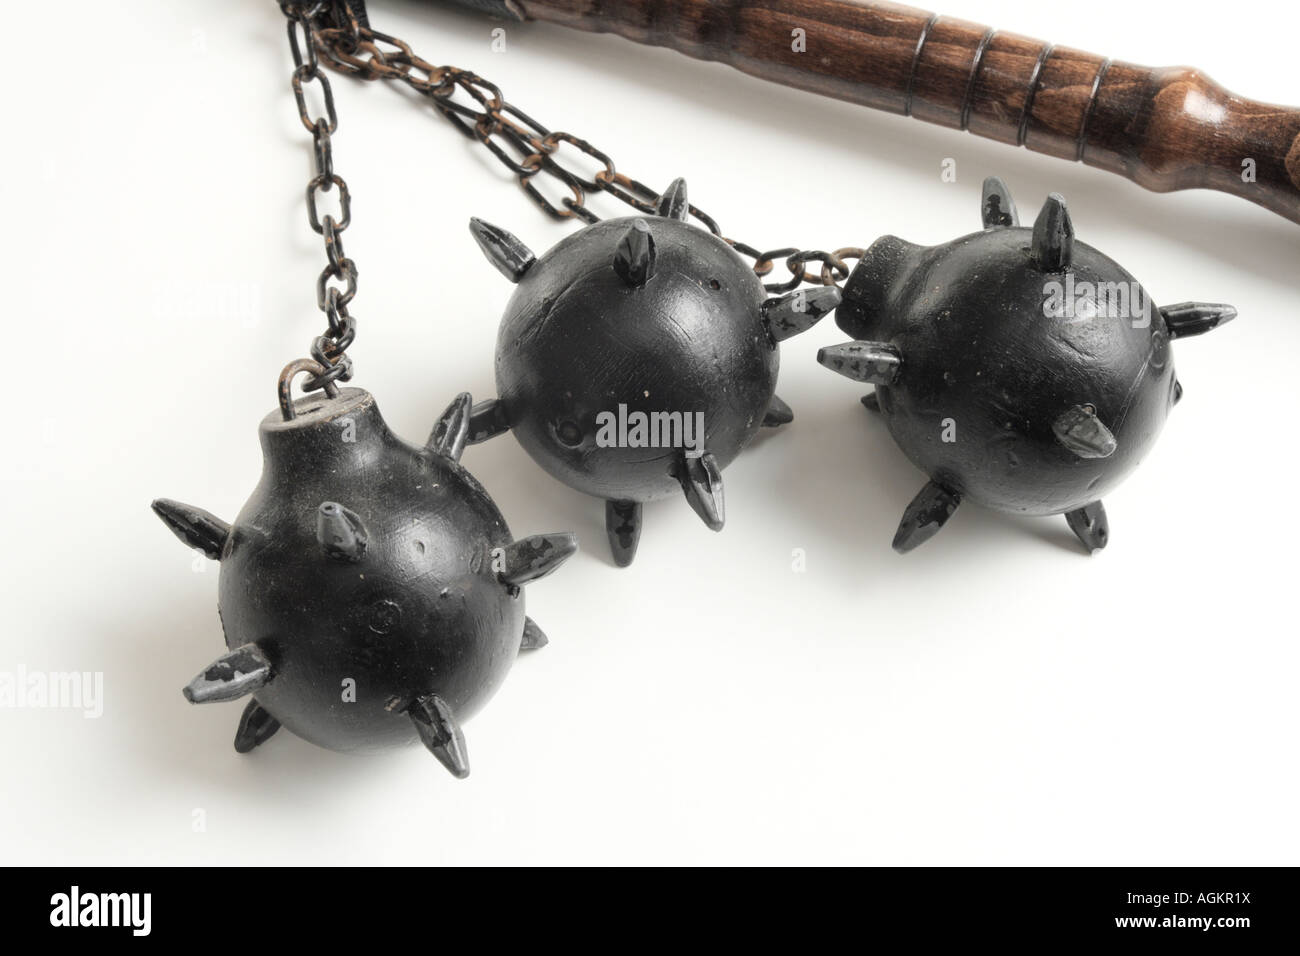 Melee weapons, heavy iron ball with spikes on a chain Stock Photo